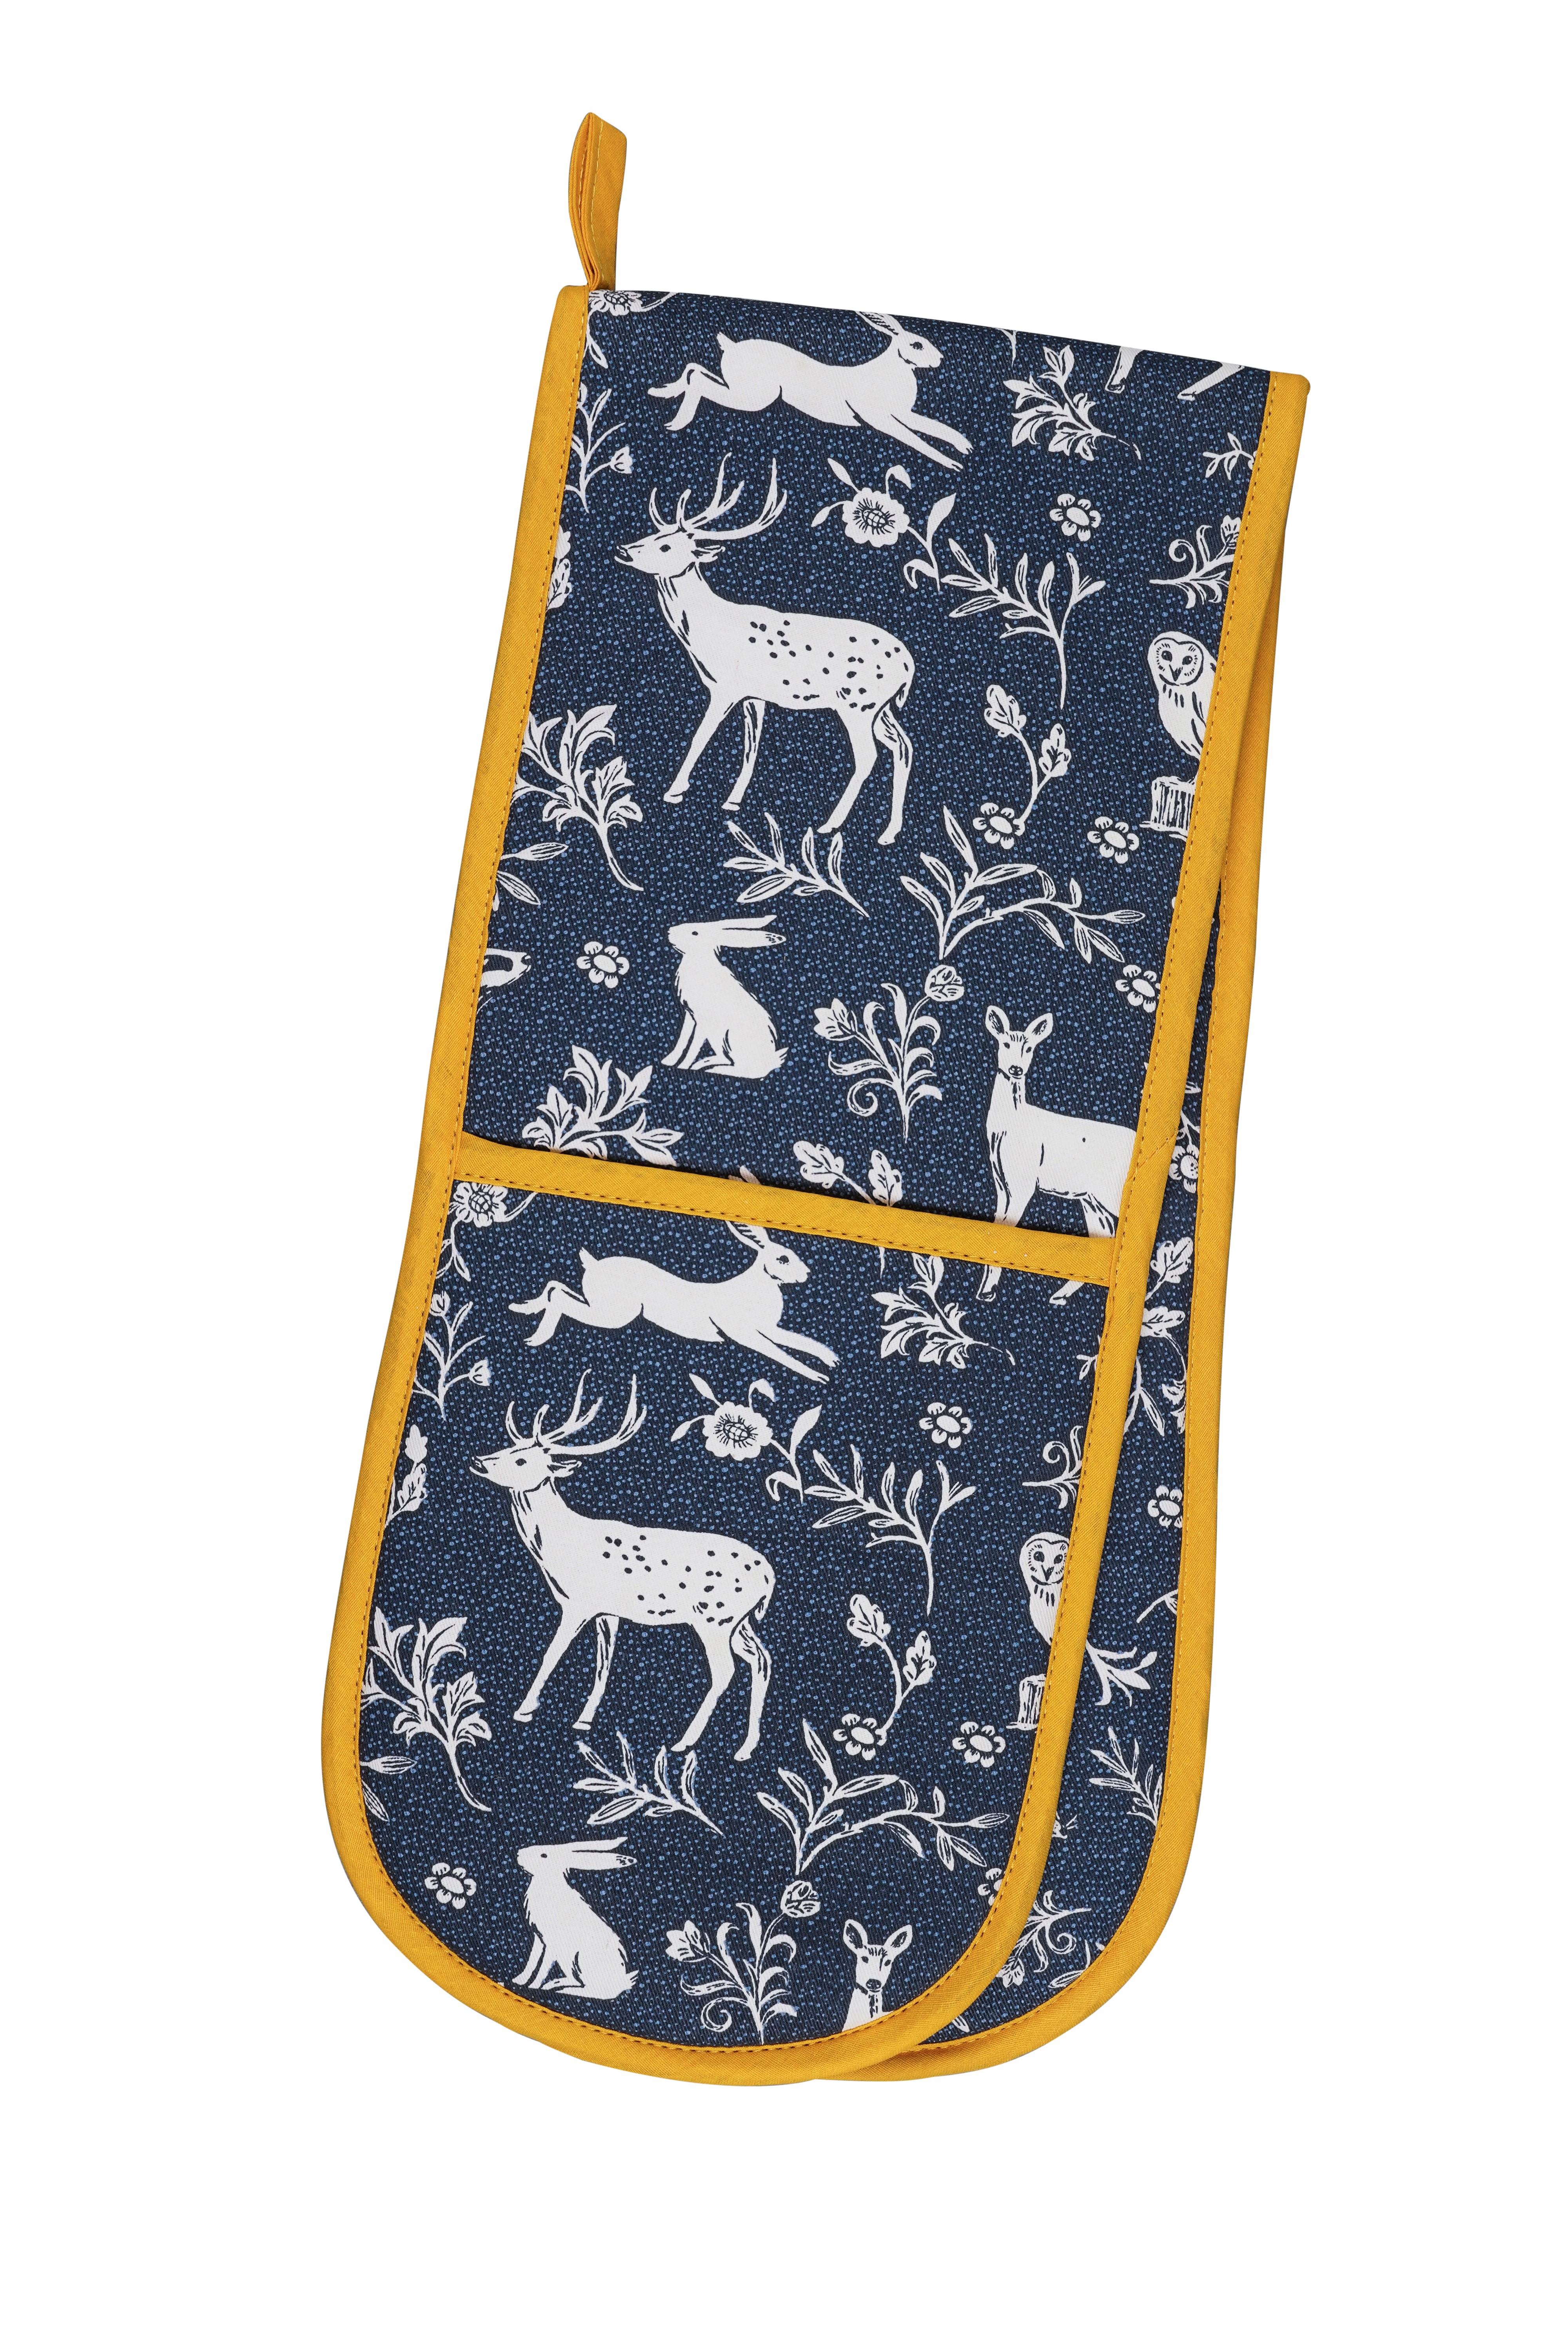 Ulster Weaver's Double Oven Glove Forest Friends Navy